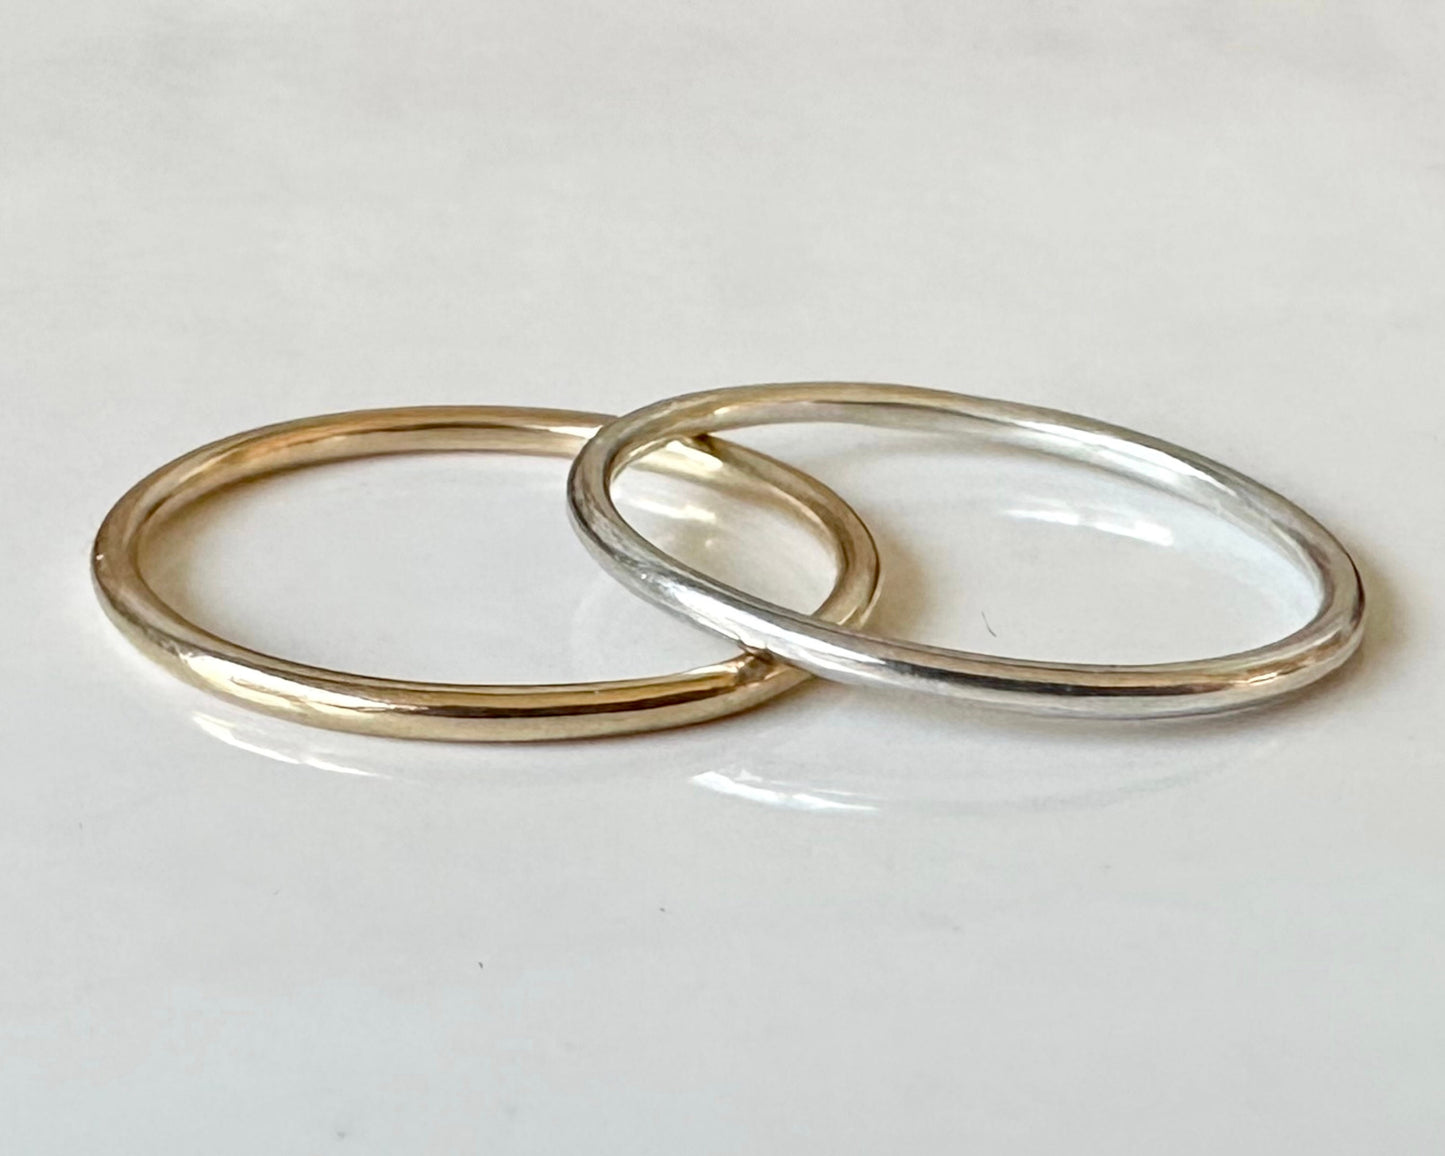 9ct Gold and 925 Sterling Silver Ring Set, 1.2mm Gold and Silver Plain Ring Band Set of Two, Shiny / Matte Skinny Stacking Rings